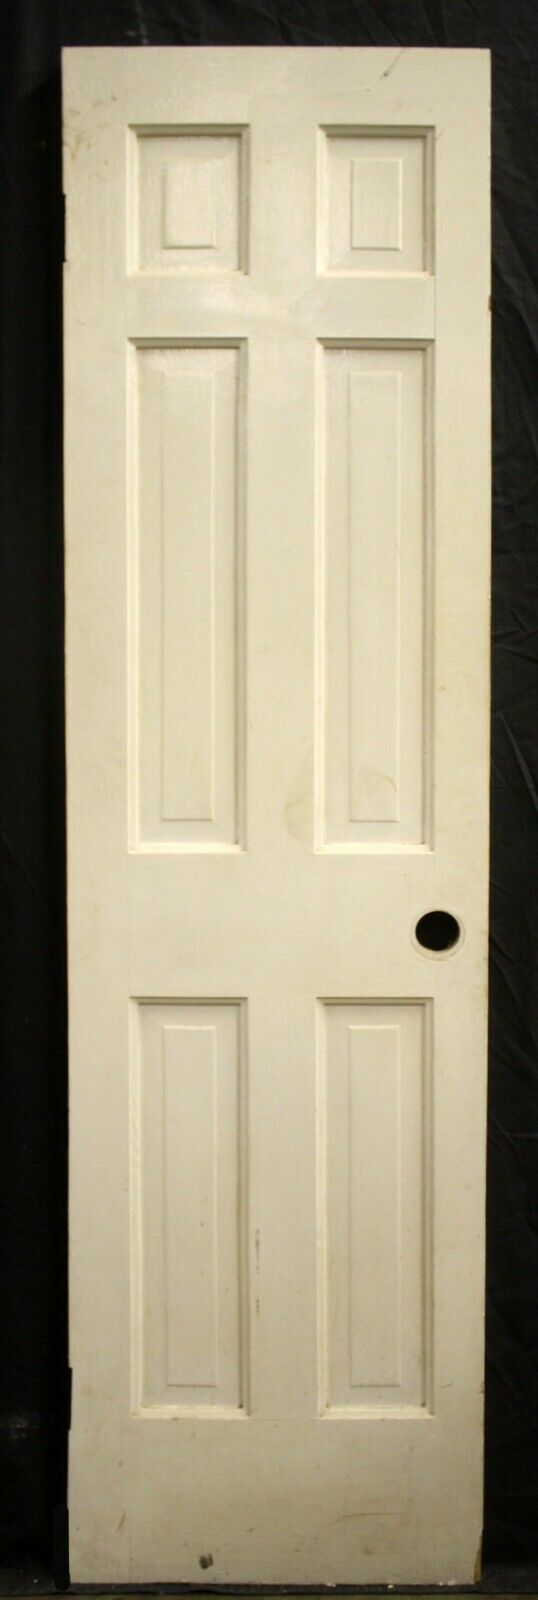 19.5"x80" Antique Solid Old Salvaged Reclaimed Wood Wooden Pantry Closet Interior Door 6 Panels